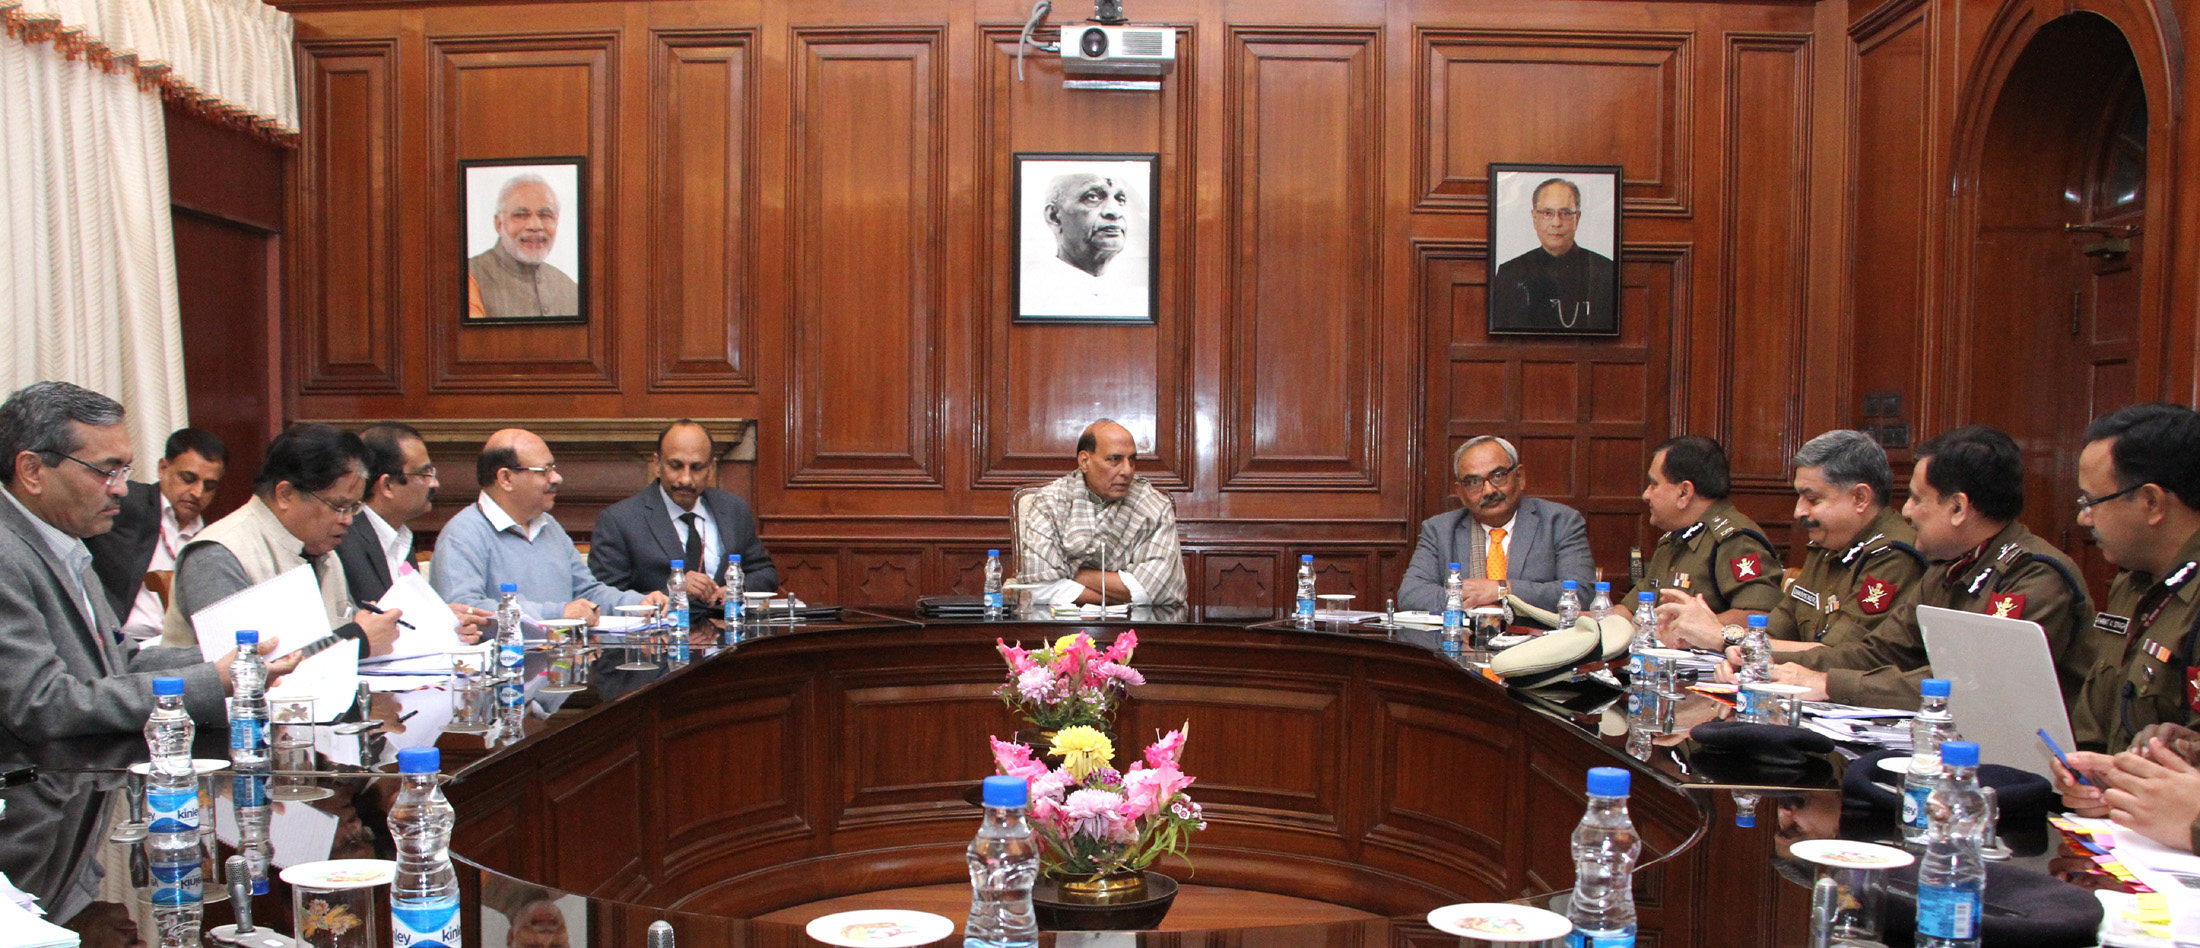 The Union Home Minister, Shri Rajnath Singh reviewing the working of CISF, in New Delhi on January 05, 2017.  The Union Home Secretary, Shri Rajiv Mehrishi, the DG, CISF, Shri O.P. Singh and senior officers of the MHA and CISF are also seen.